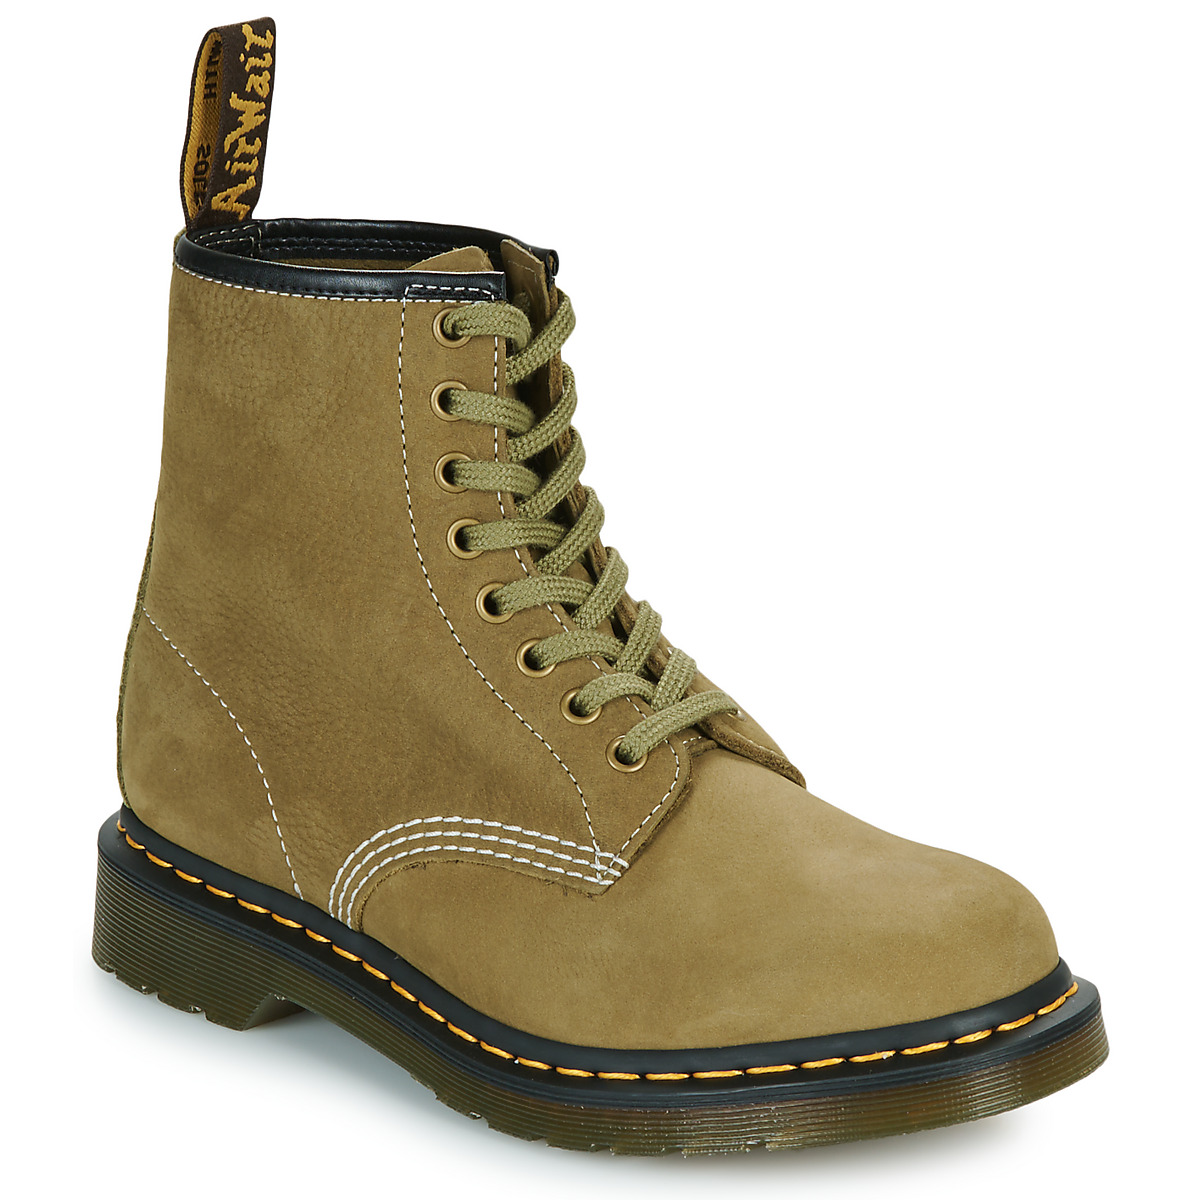 Dr Martens 1460 Muted Olive Tumbled Nubuck+e.h.suede Kaki